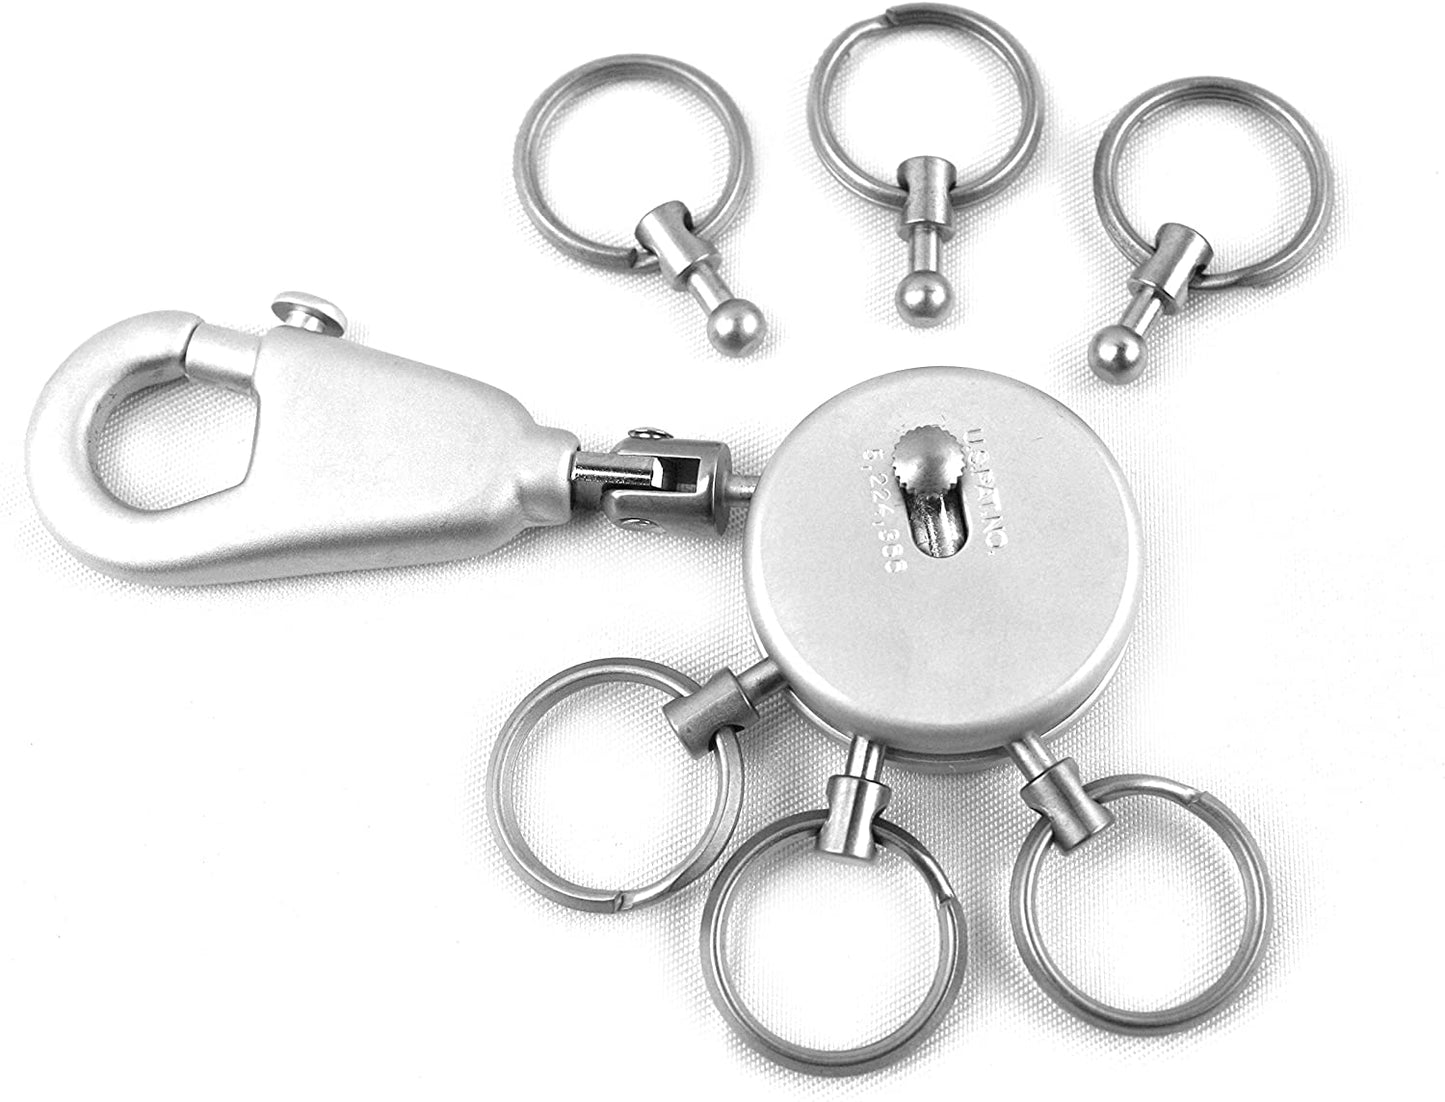 Patent Keyholder with 6 Rings (Skyr60)